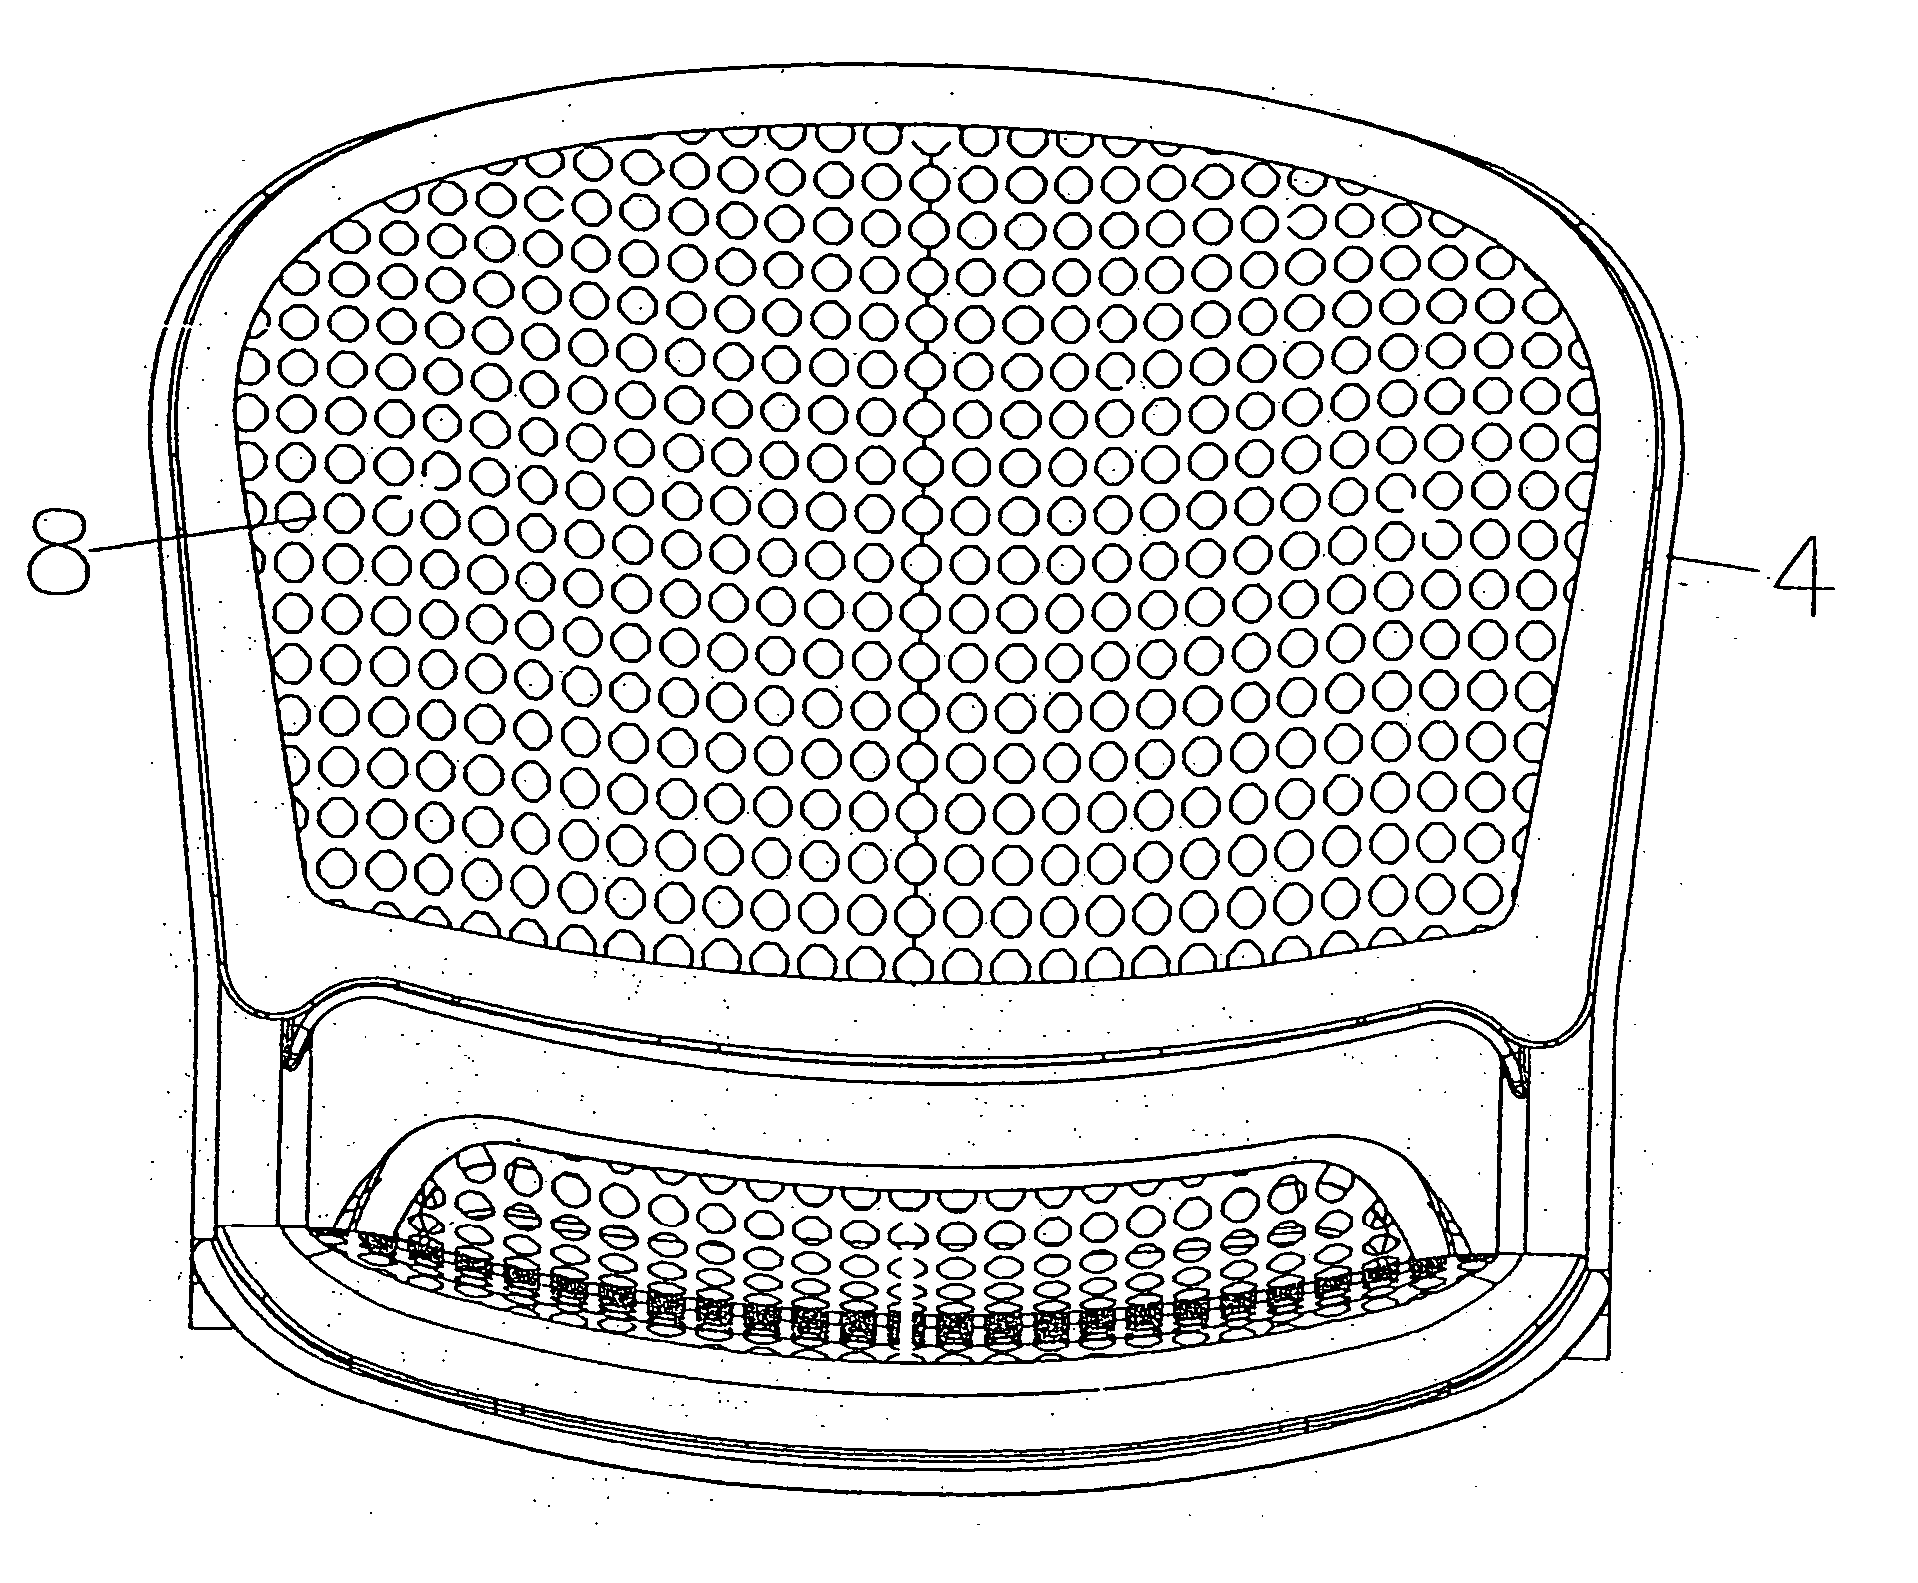 Seating structure having flexible seating surface